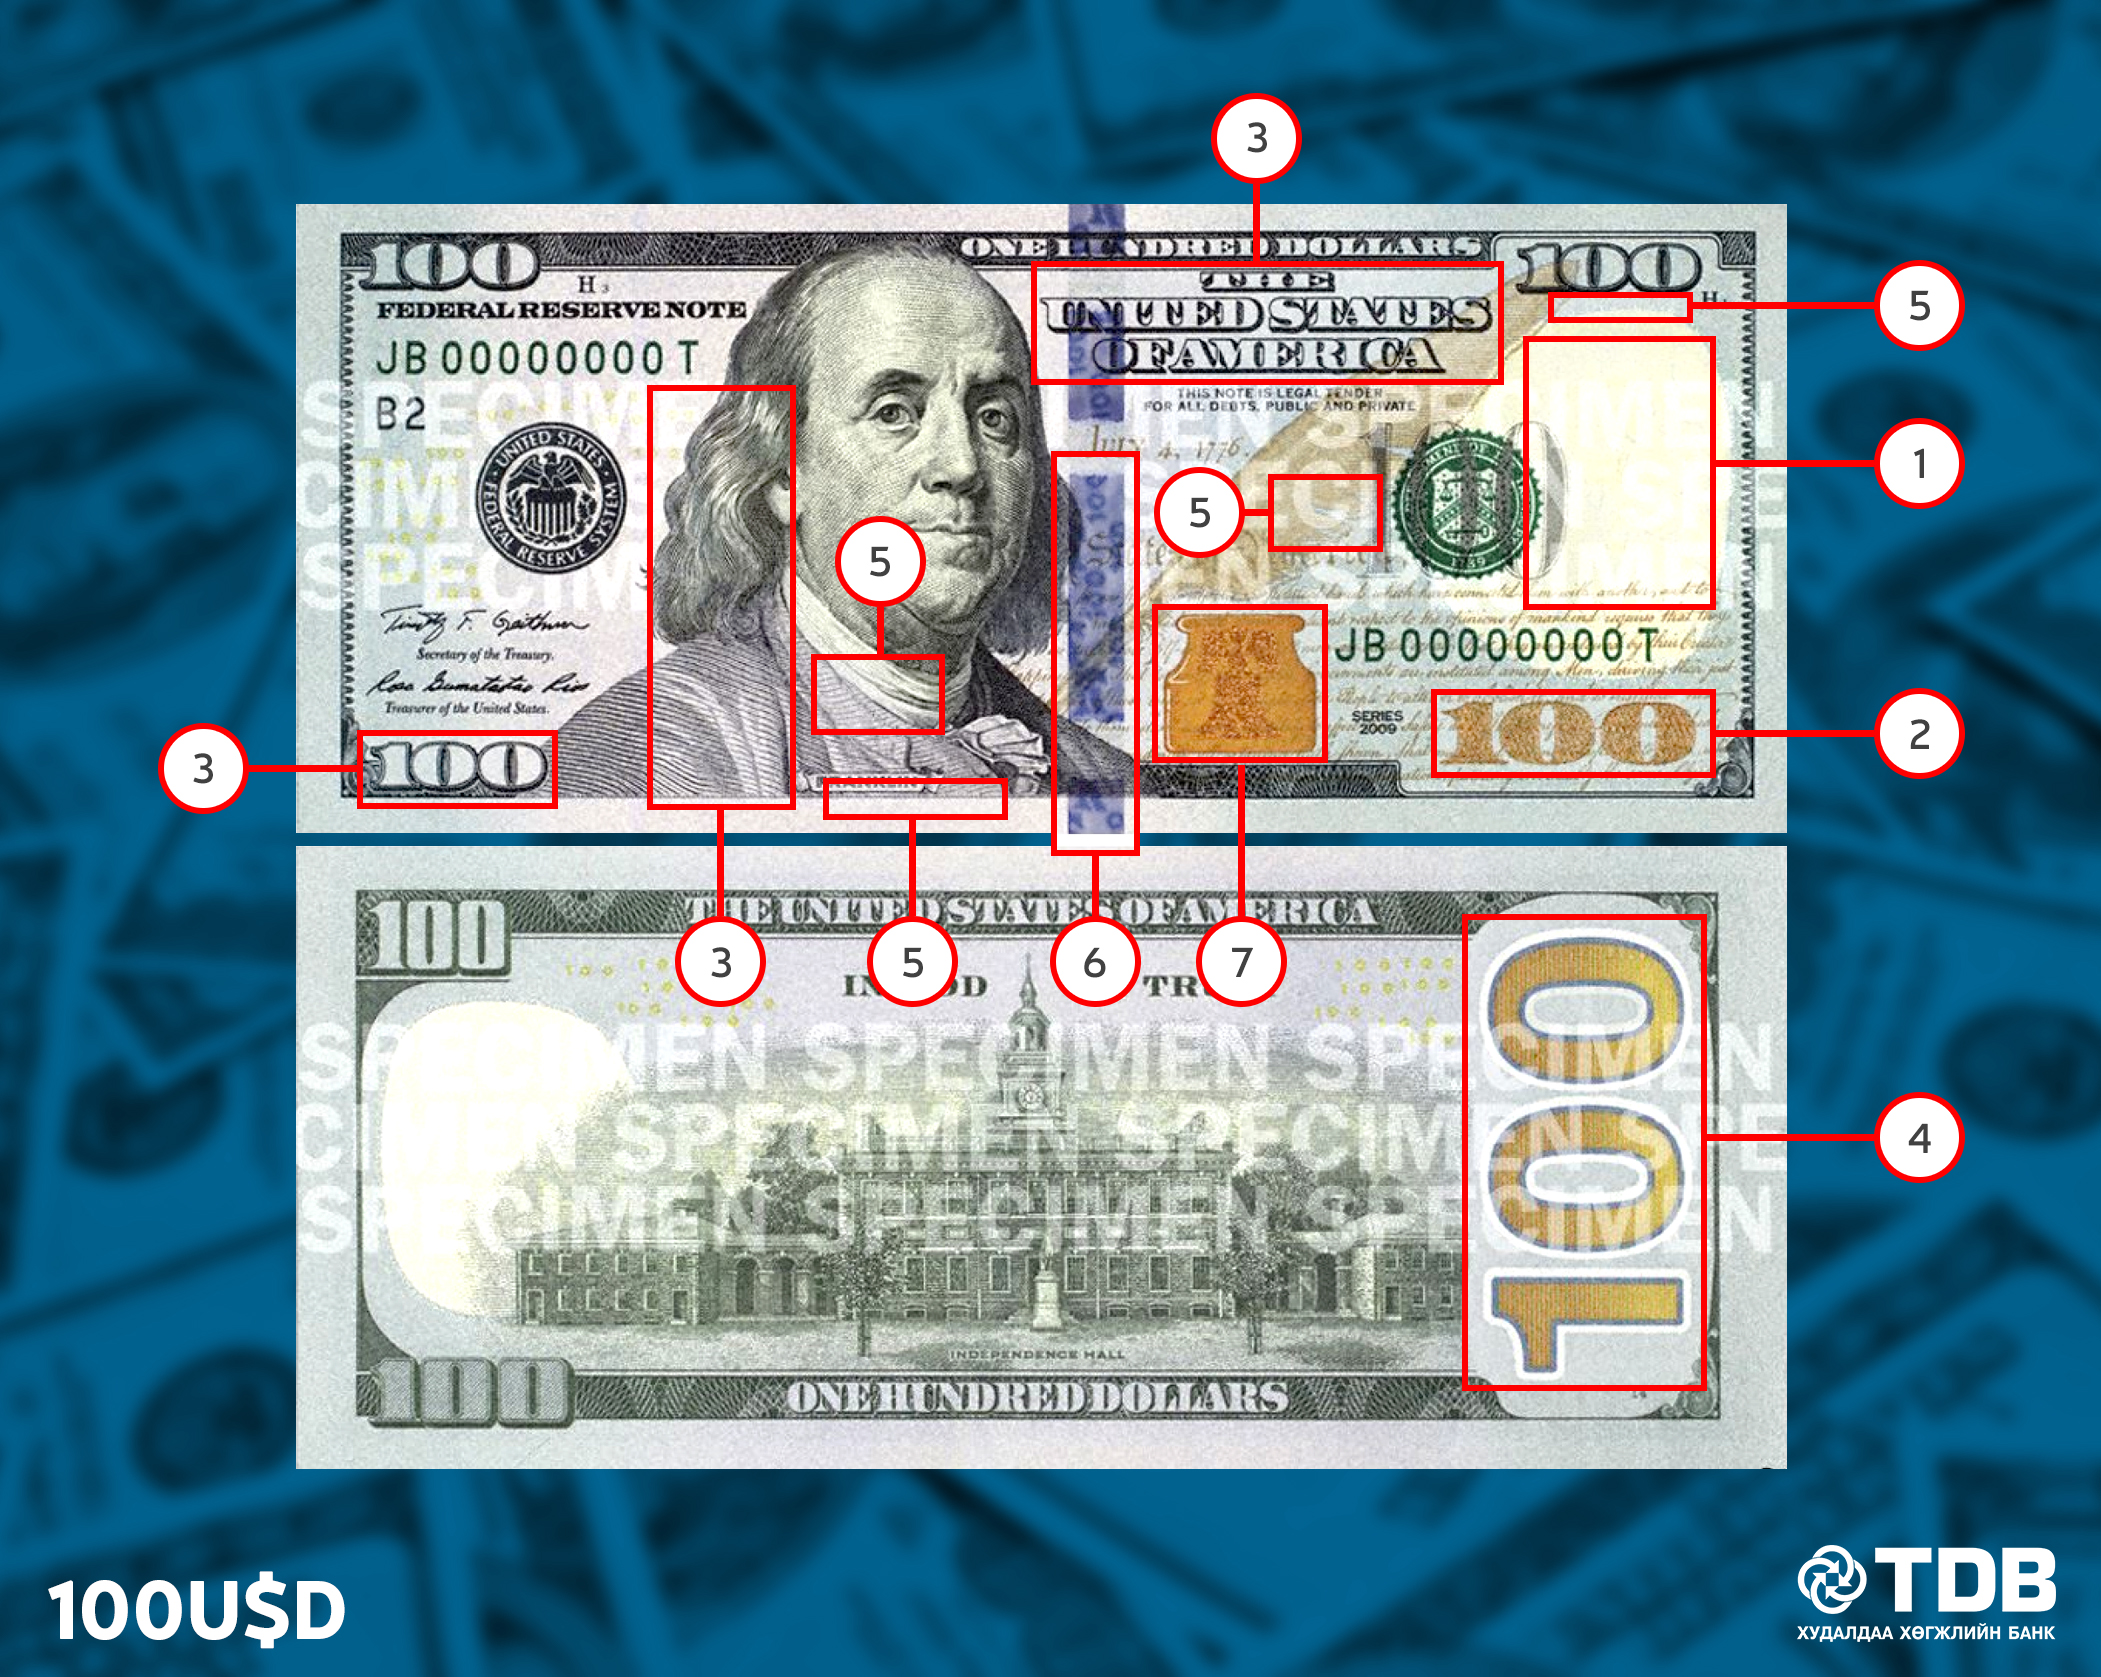 Security features on $100 notes presented by Financial safety for ...